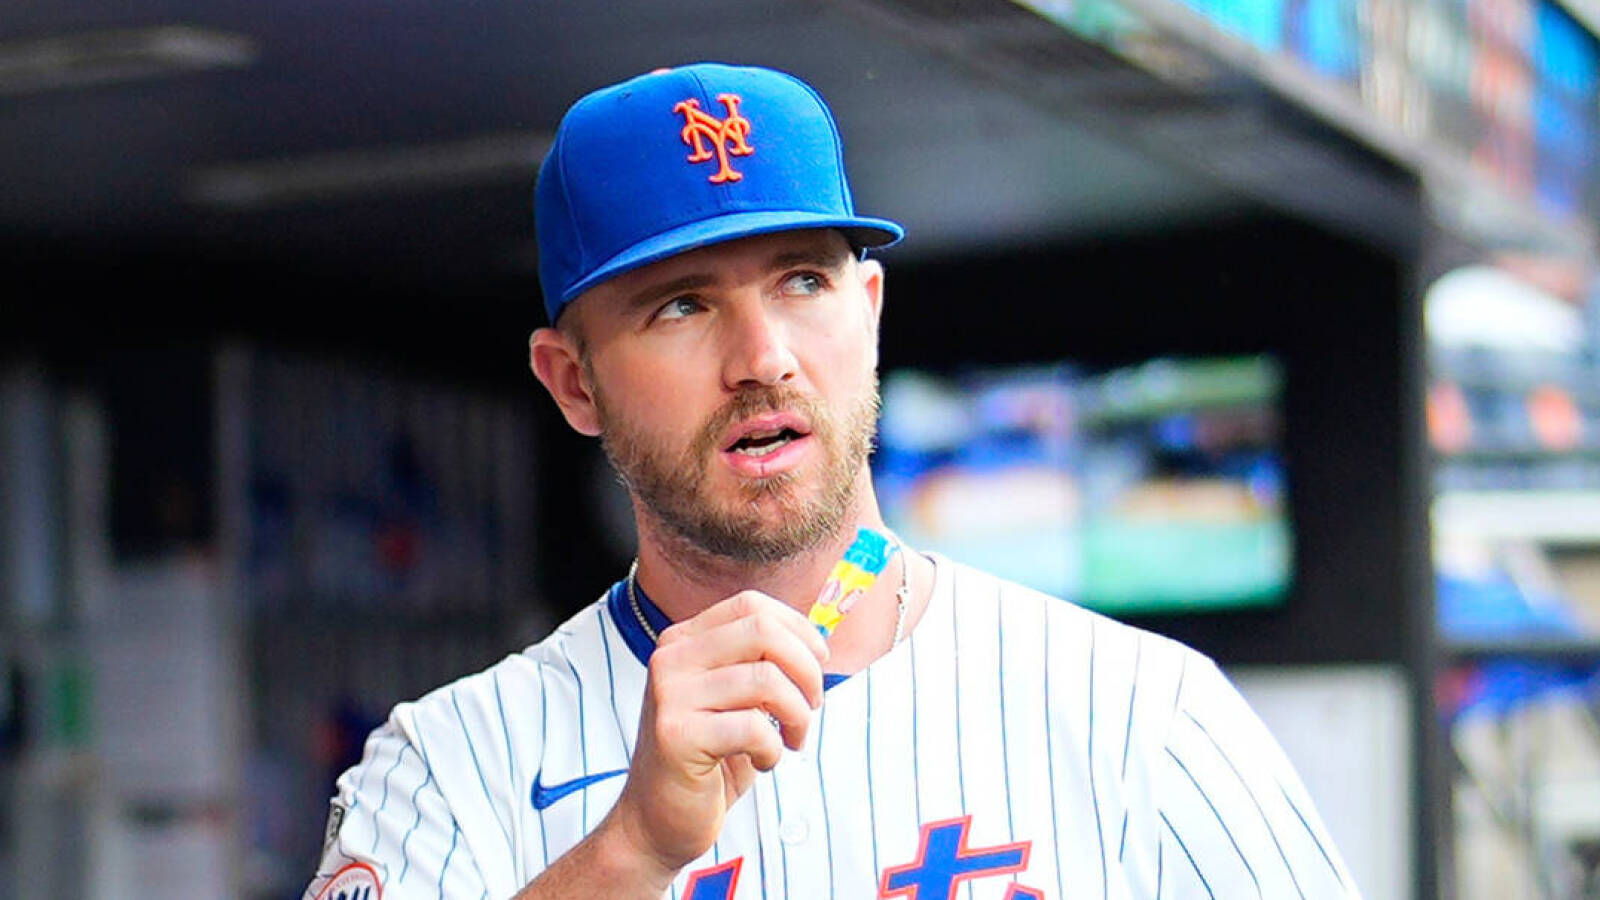 Why scout is optimistic Mets' Pete Alonso will soon heat up